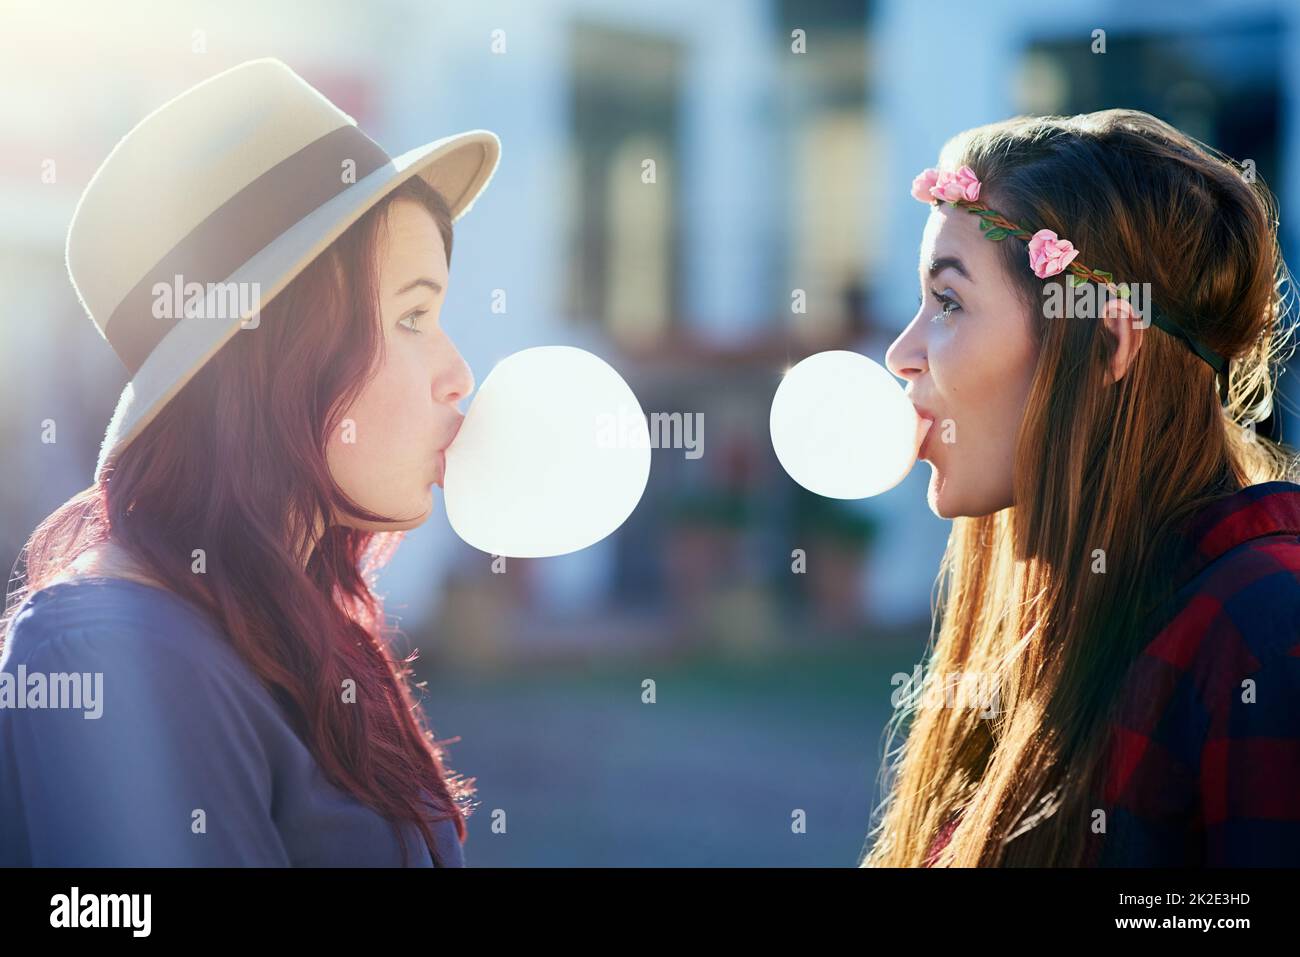 Nothing better than best friend being silly together. Shot of two young friends blowing chewing gum while facing each other. Stock Photo